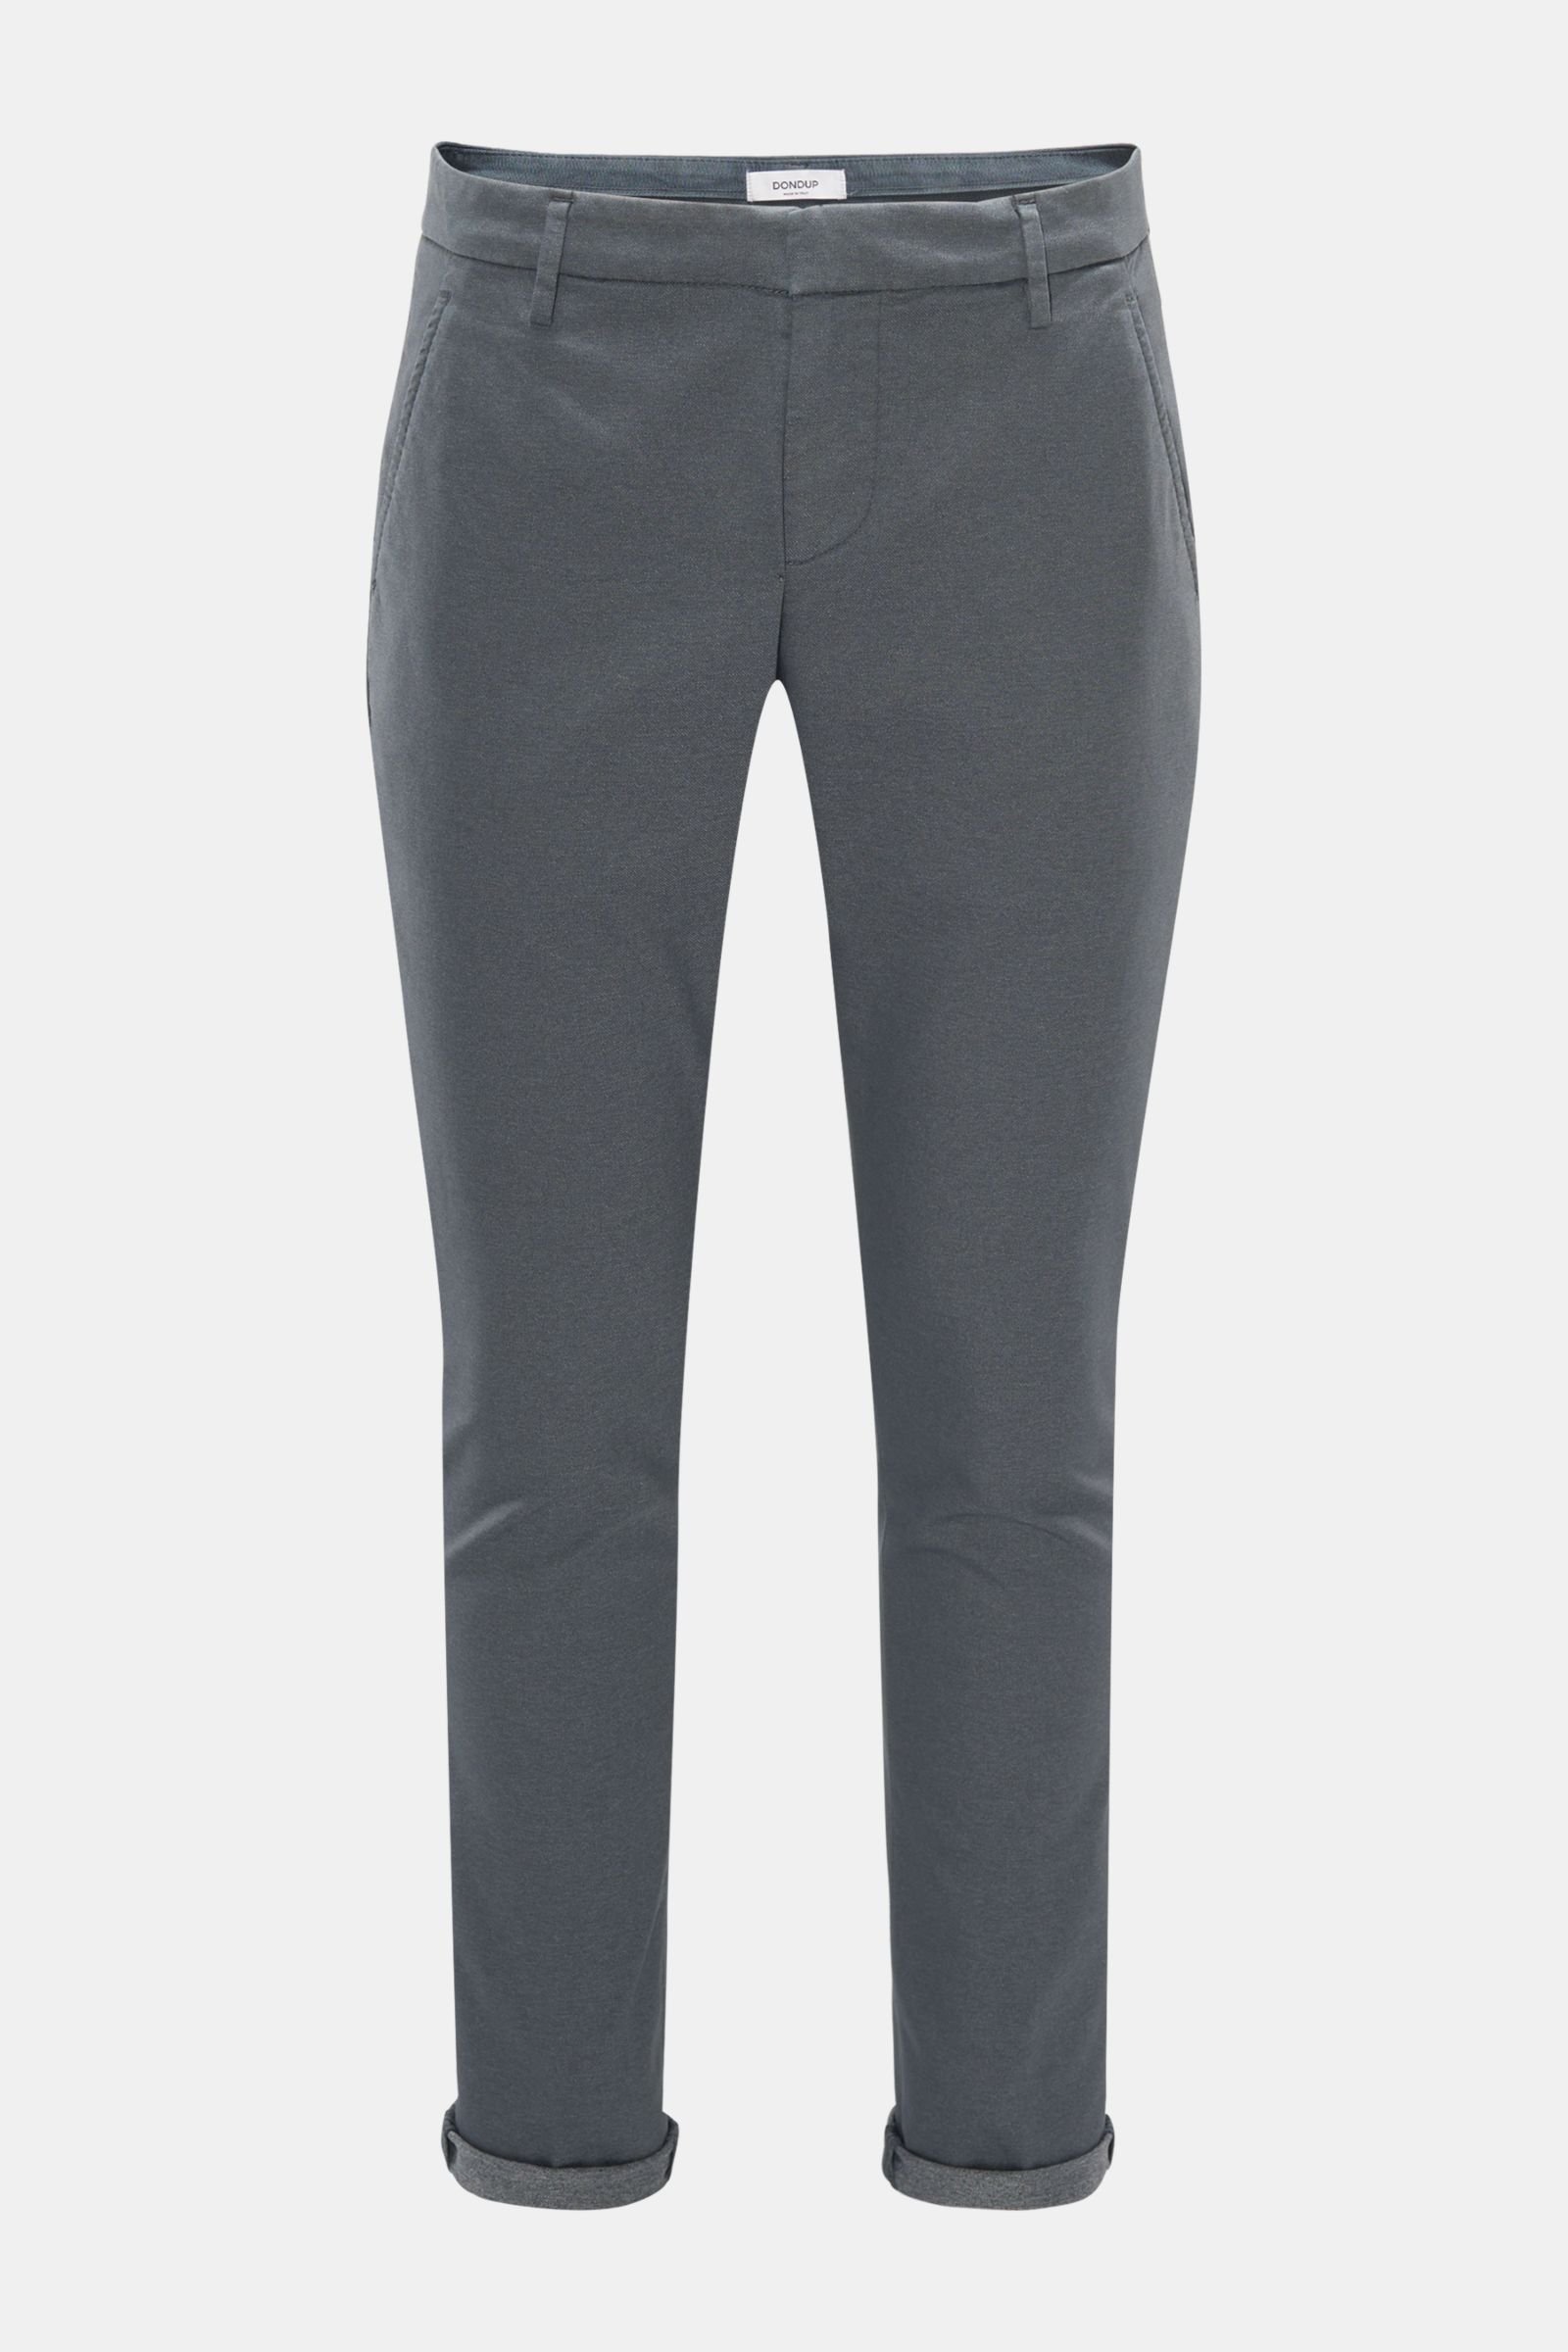 Trousers grey-blue